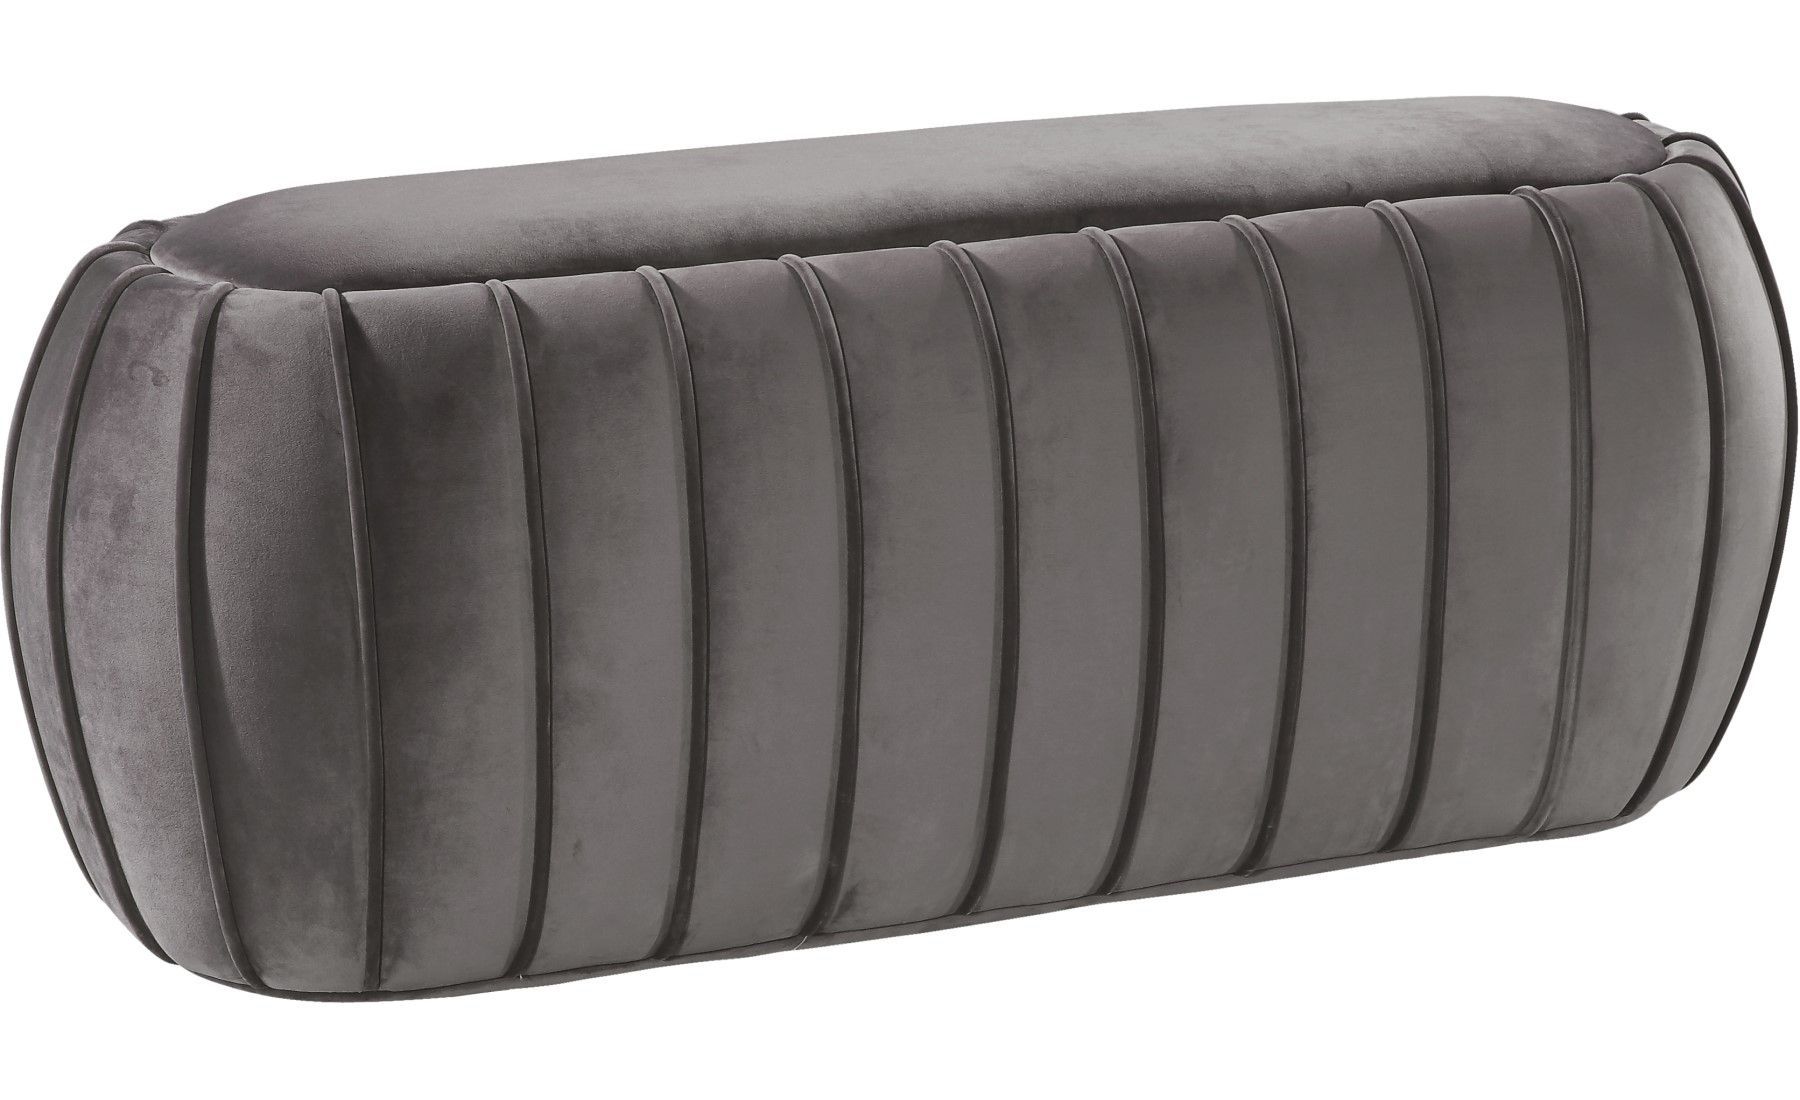 Dandrea Transitional Grey Velvet Oval Ottoman Bench With Channel Tufted For Gray Fabric Oval Ottomans (View 13 of 20)